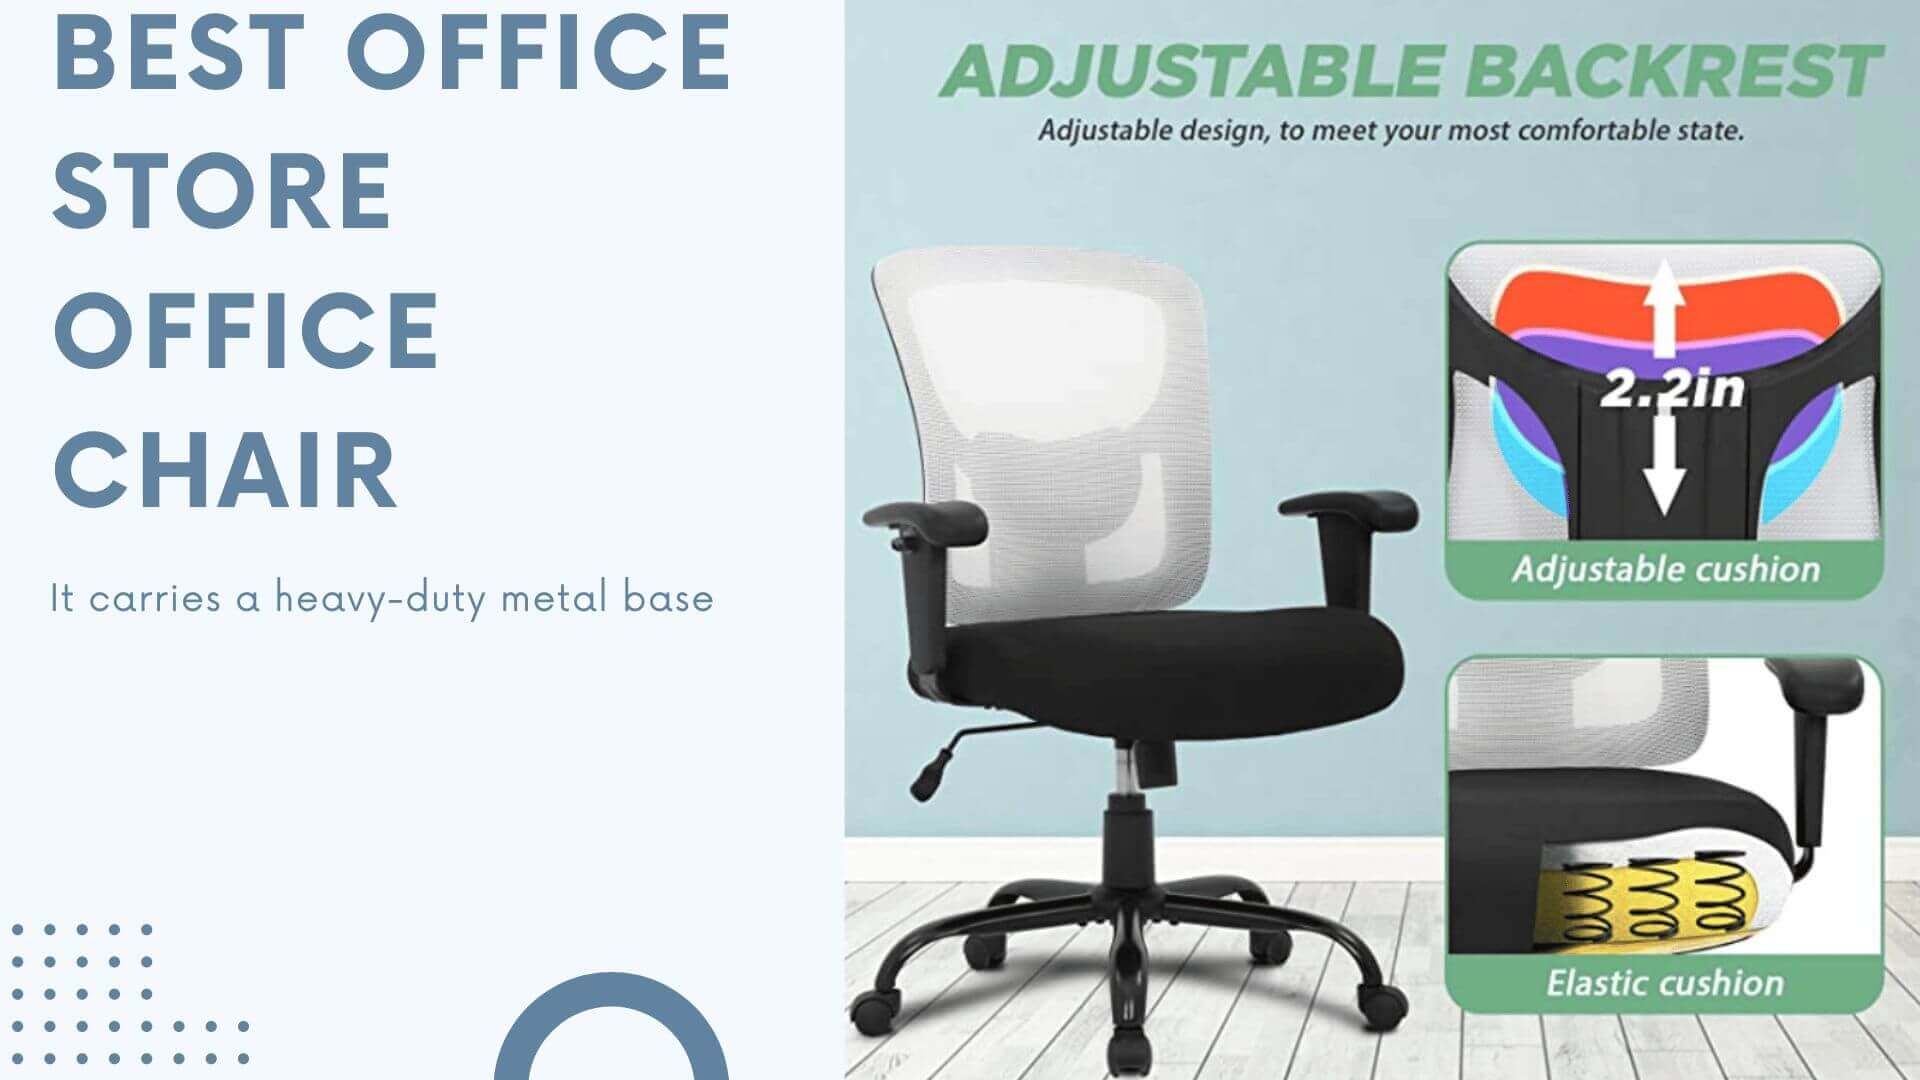 Best Office Store Office Chair